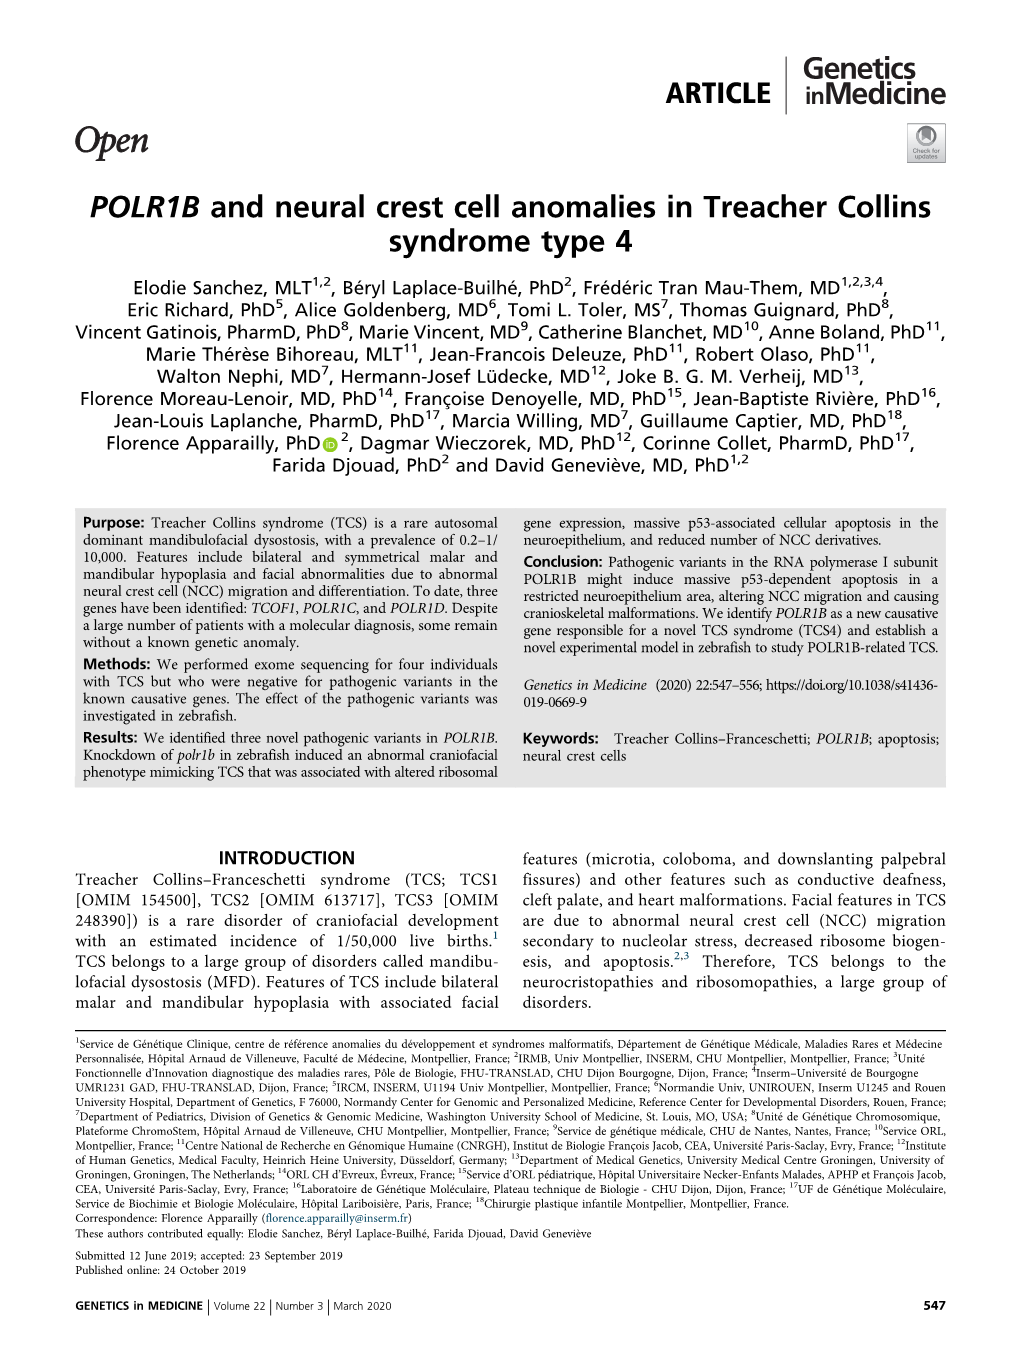 POLR1B and Neural Crest Cell Anomalies in Treacher Collins Syndrome Type 4